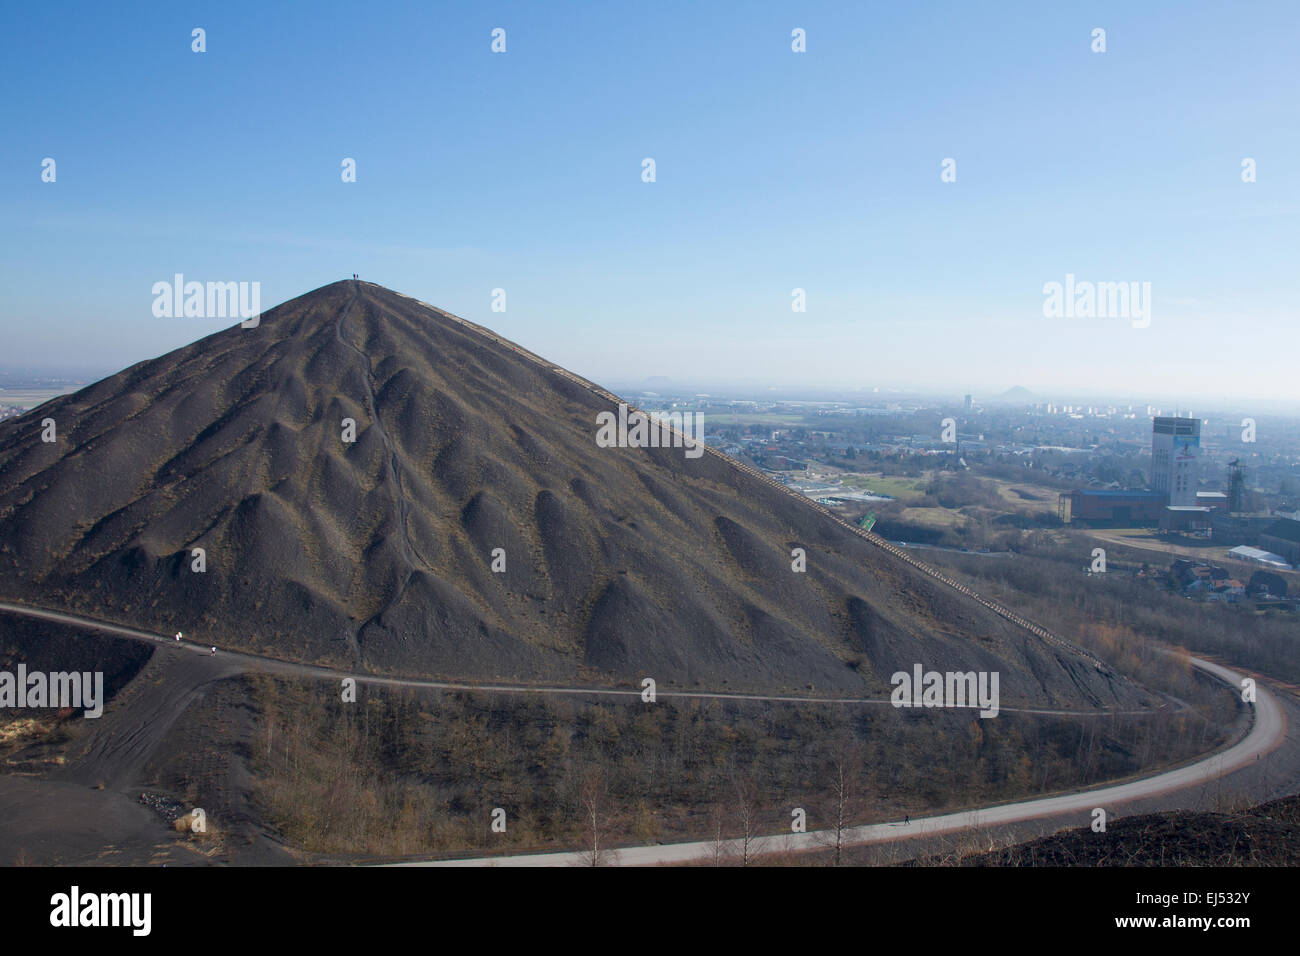 The 11/19 pit and twin slag heaps in Lens (France) or residues left over from the coal extraction process. Stock Photo